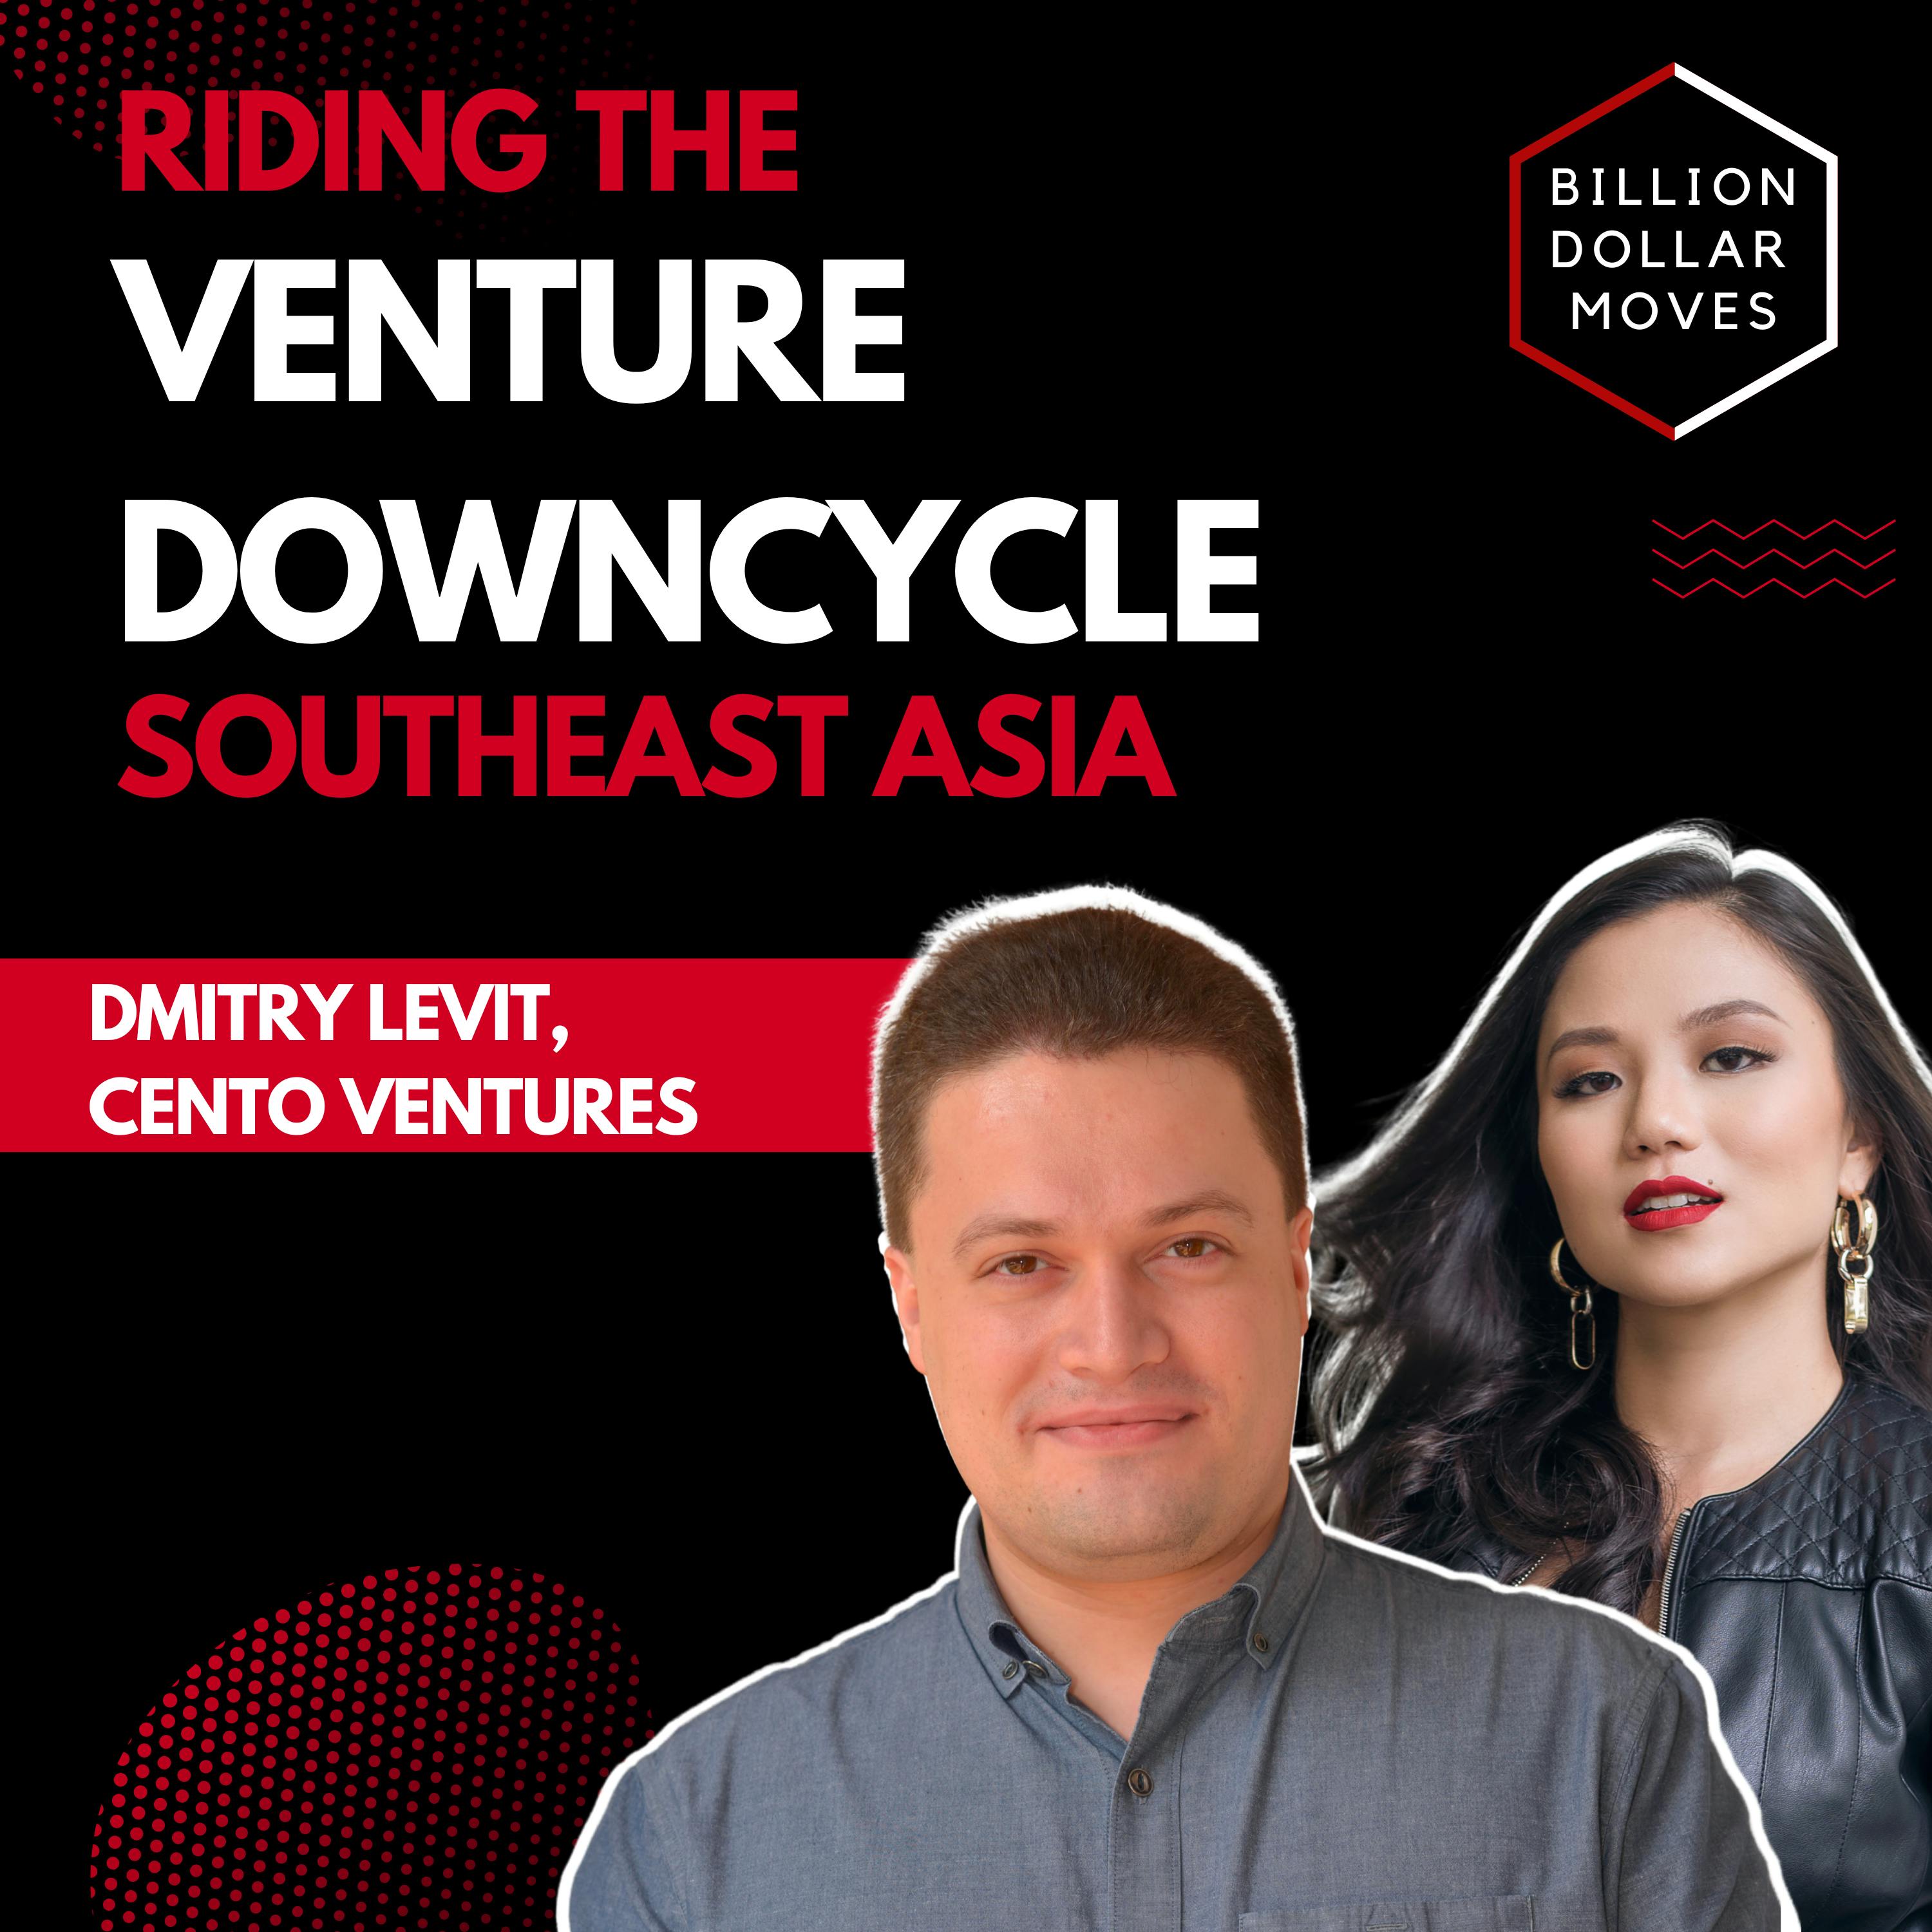 "Let's Take Our Chips Off The Table"—Riding the Venture Downcycle: Investing in Southeast Asia with Dmitry Levit, Cento Ventures (Part 2)